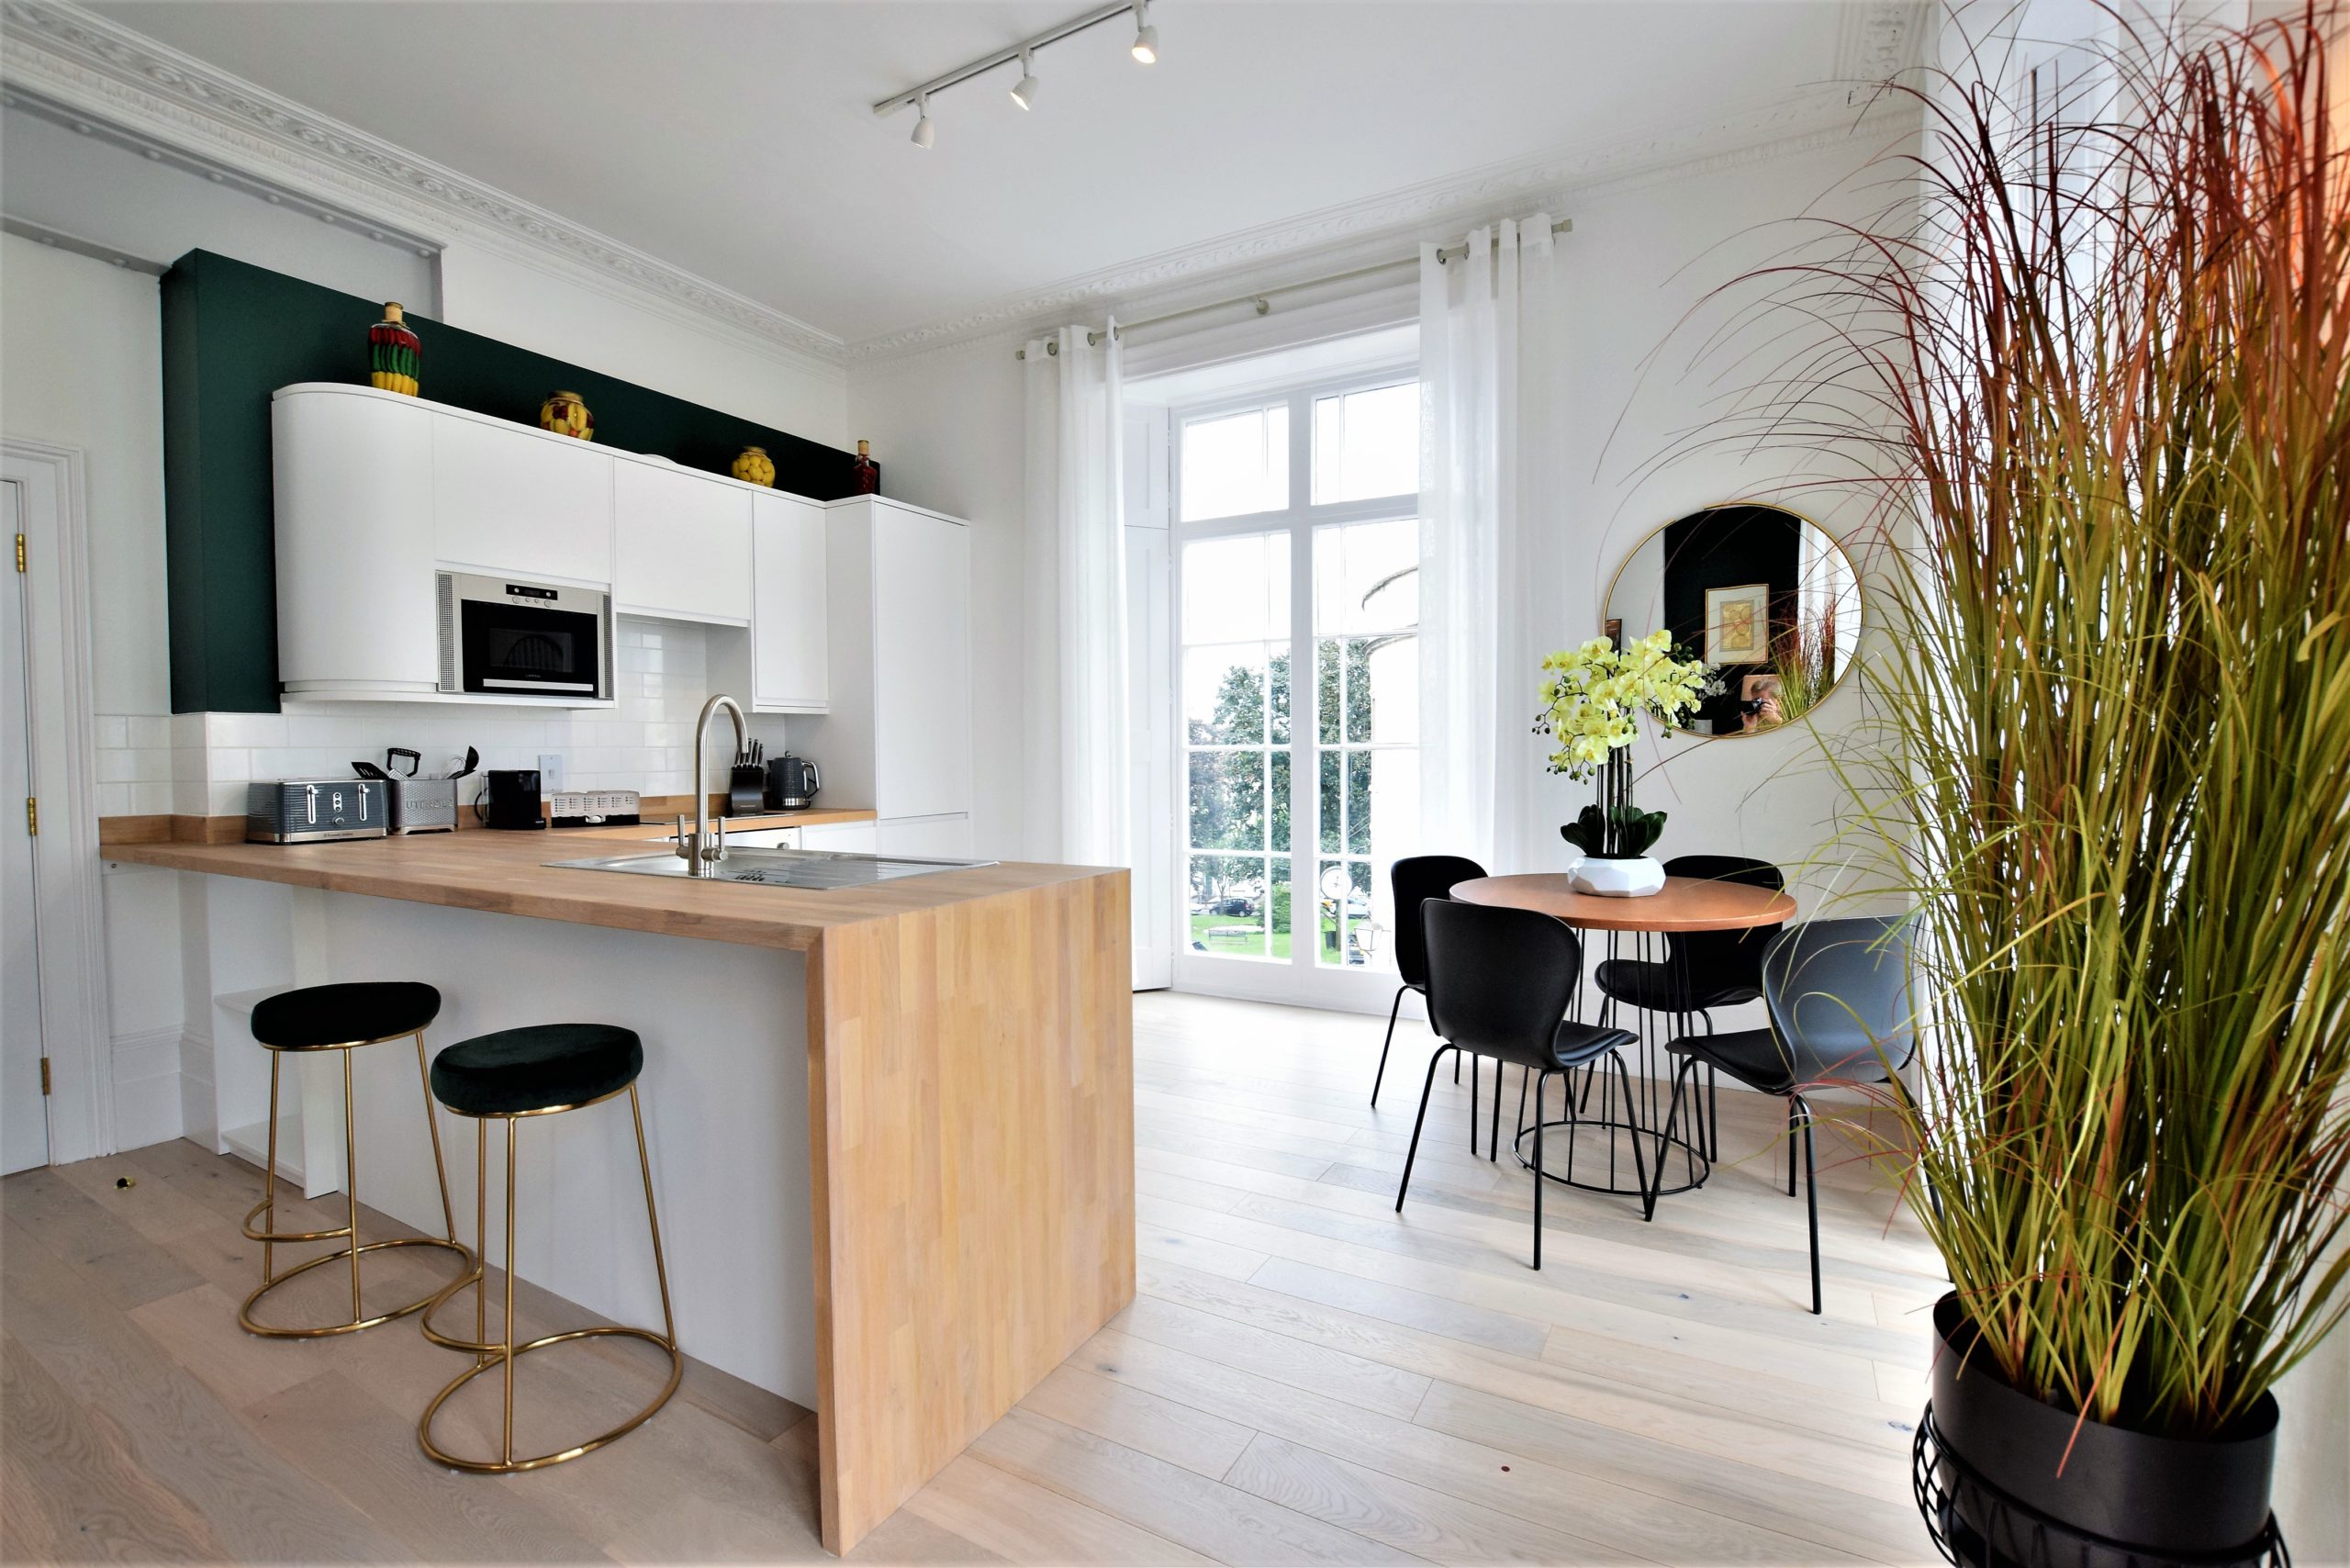 Frederick Place - Serviced Apartments in Clifton, Bristol